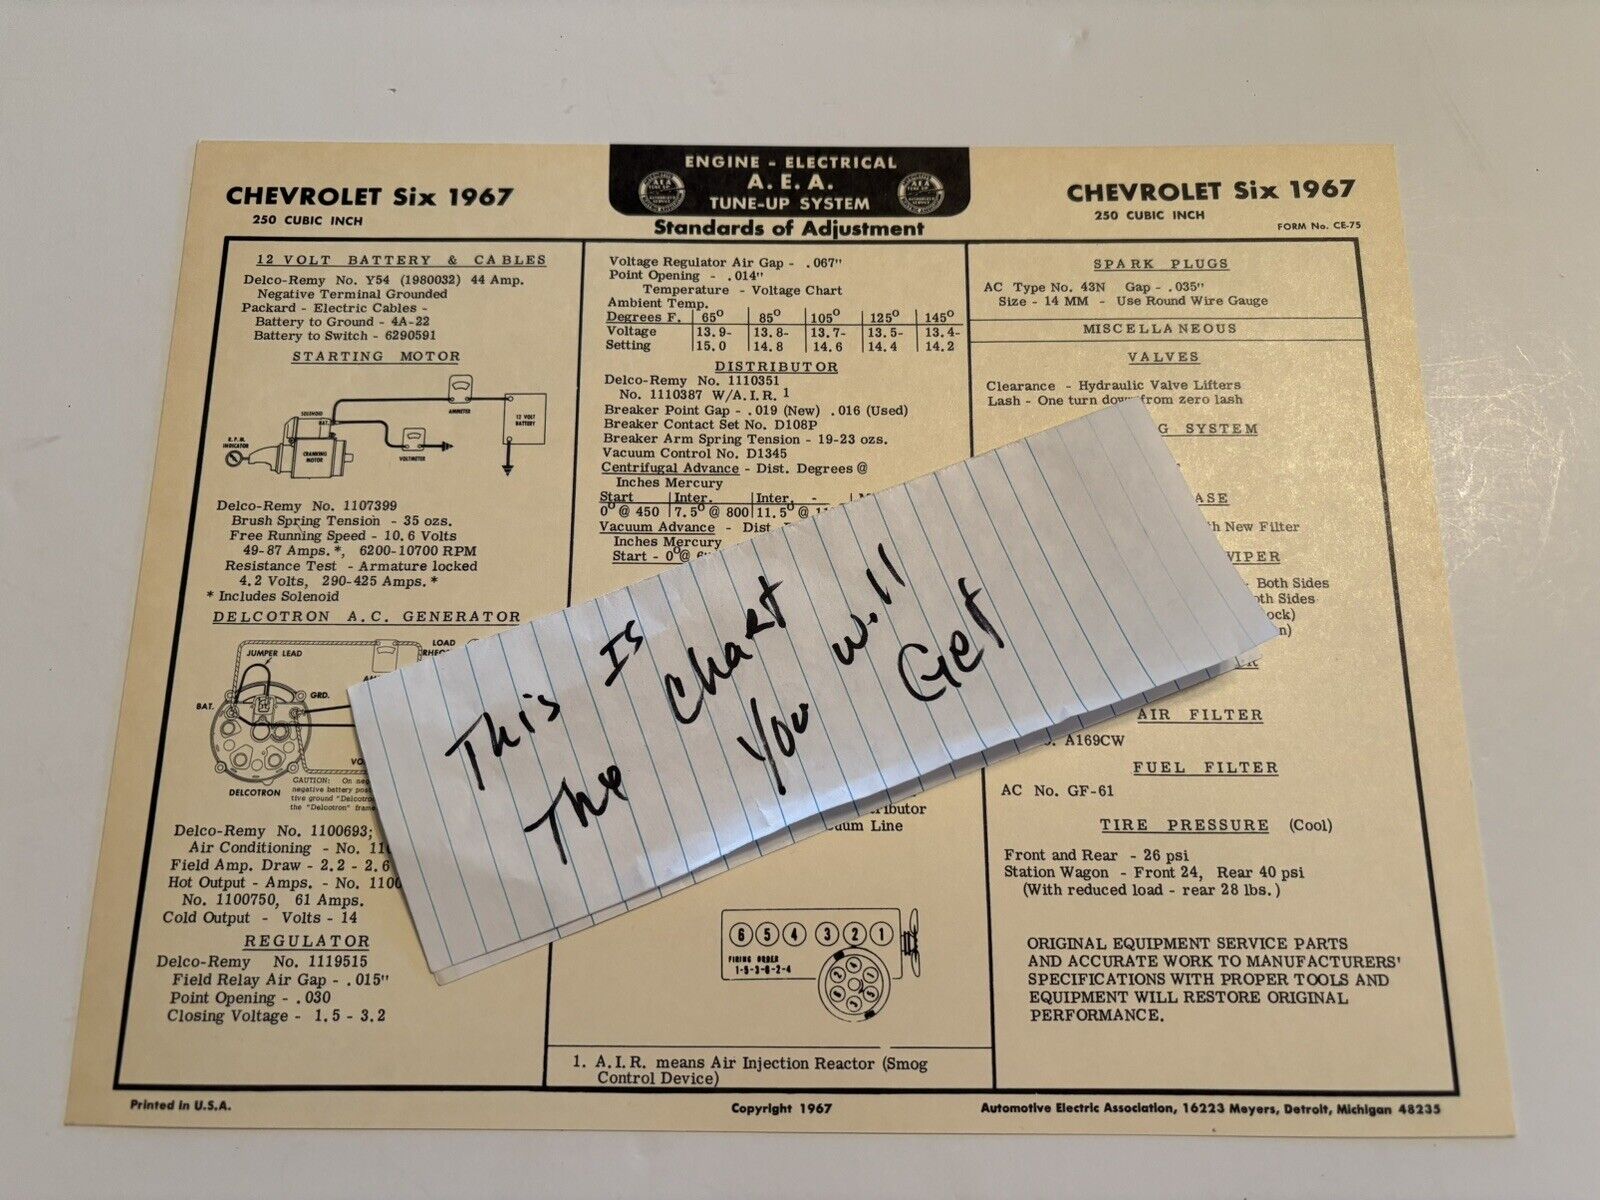 AEA Tune-Up Chart System 1967 Chevrolet  Six 250 Engine